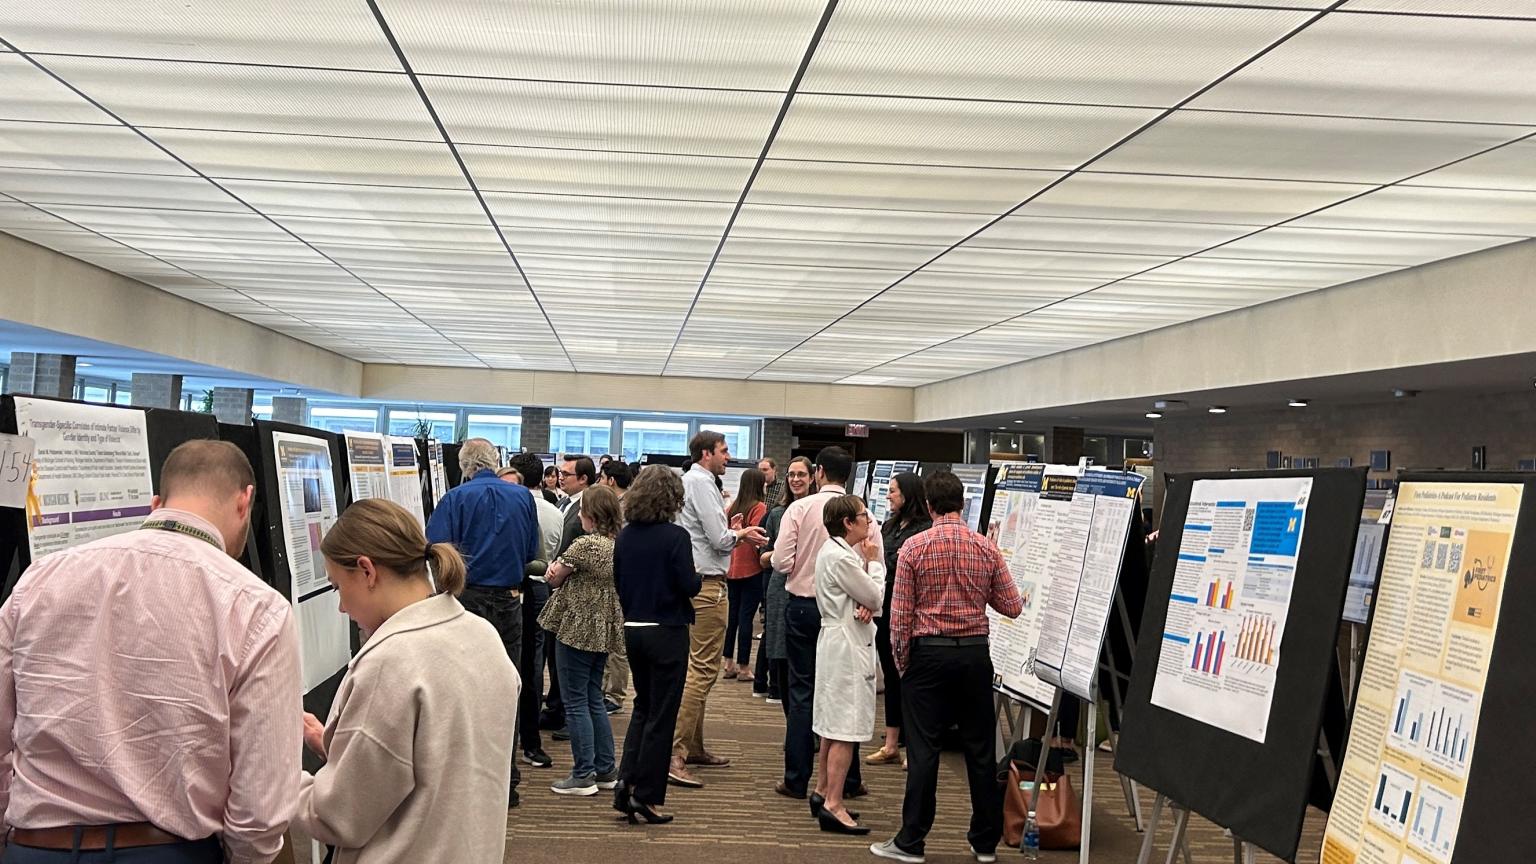 Faculty and trainees surrounded by research posters